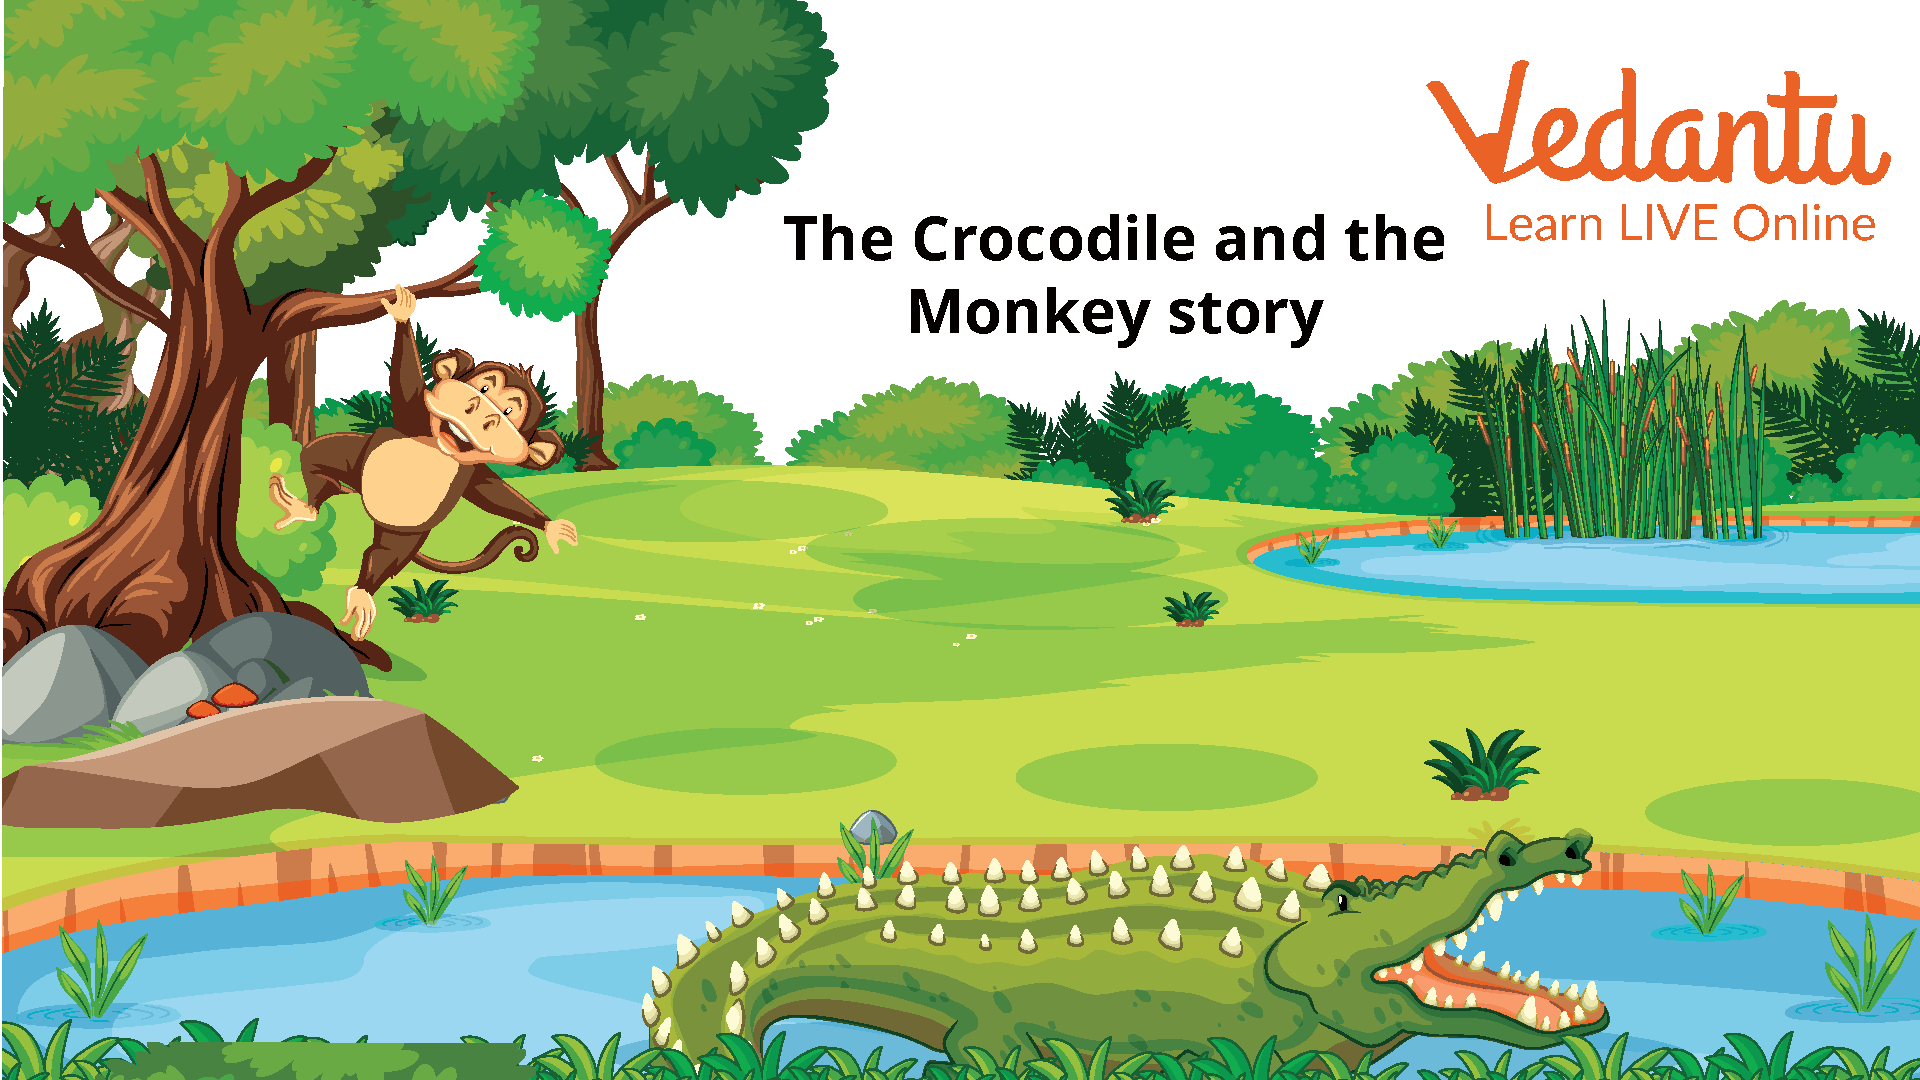 Learn about the tale of Crocodile and the Monkey